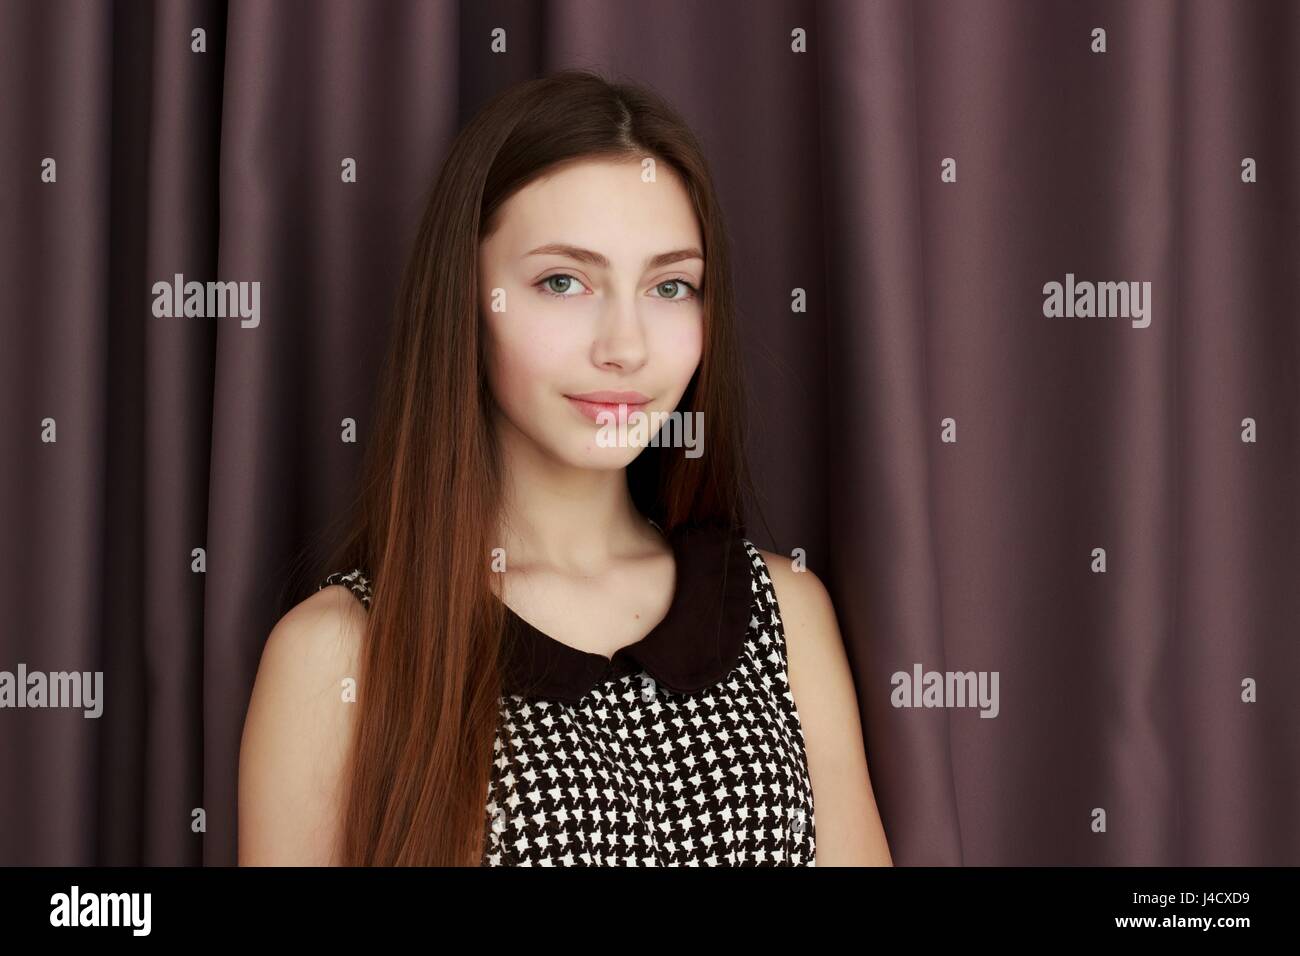 Young woman smiling at camera, portrait Stock Photo